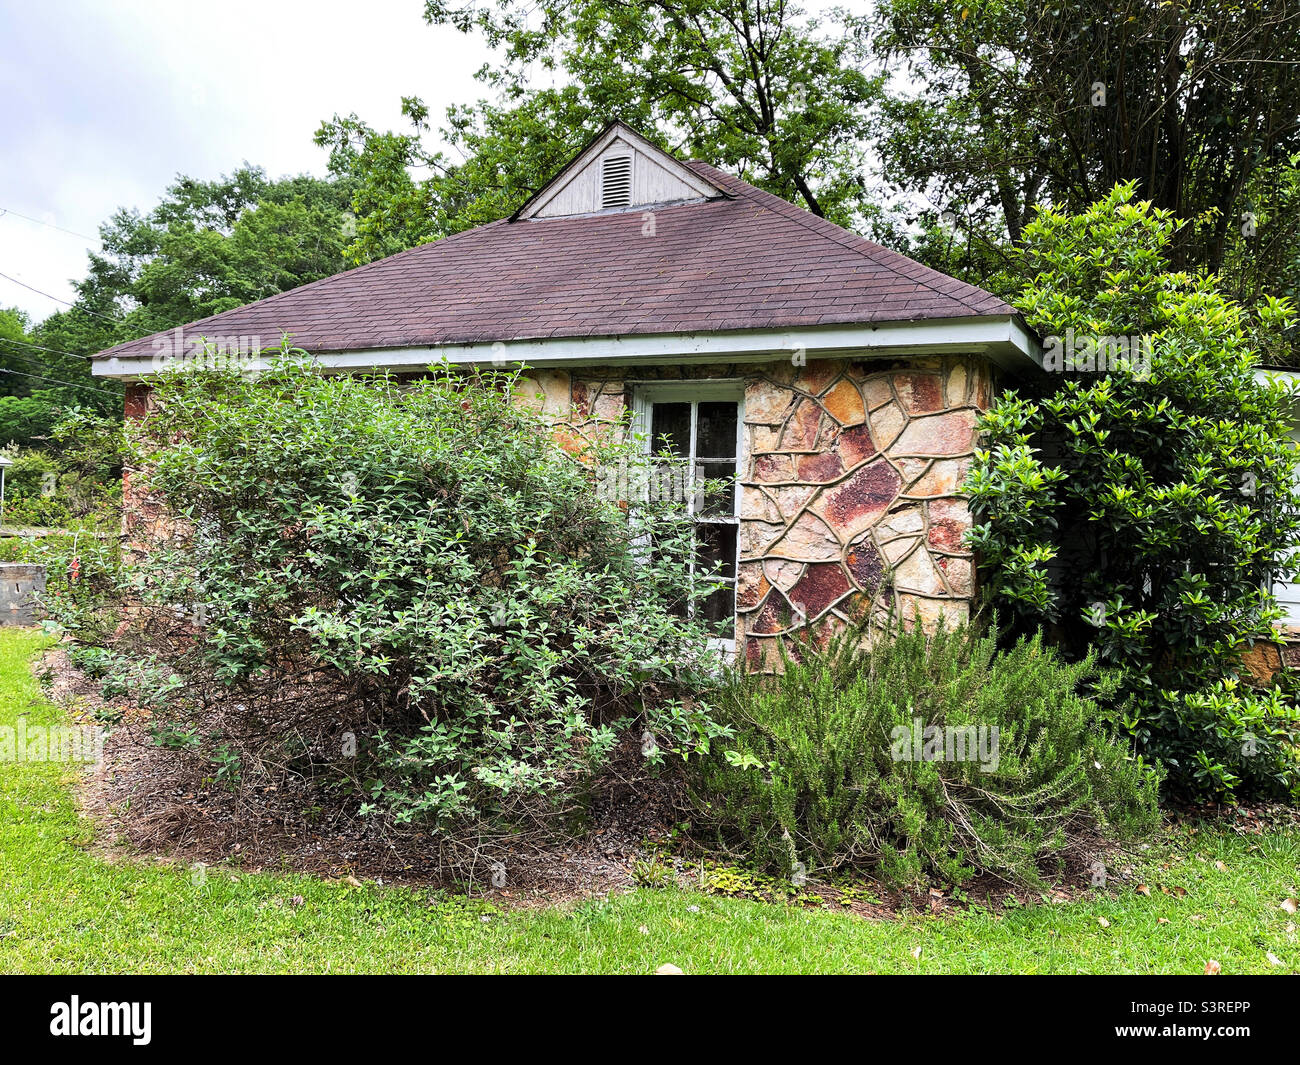 Historic masonry built house with grapevine joint architectural style surrounded by native plants. Built in 1935. Stock Photo